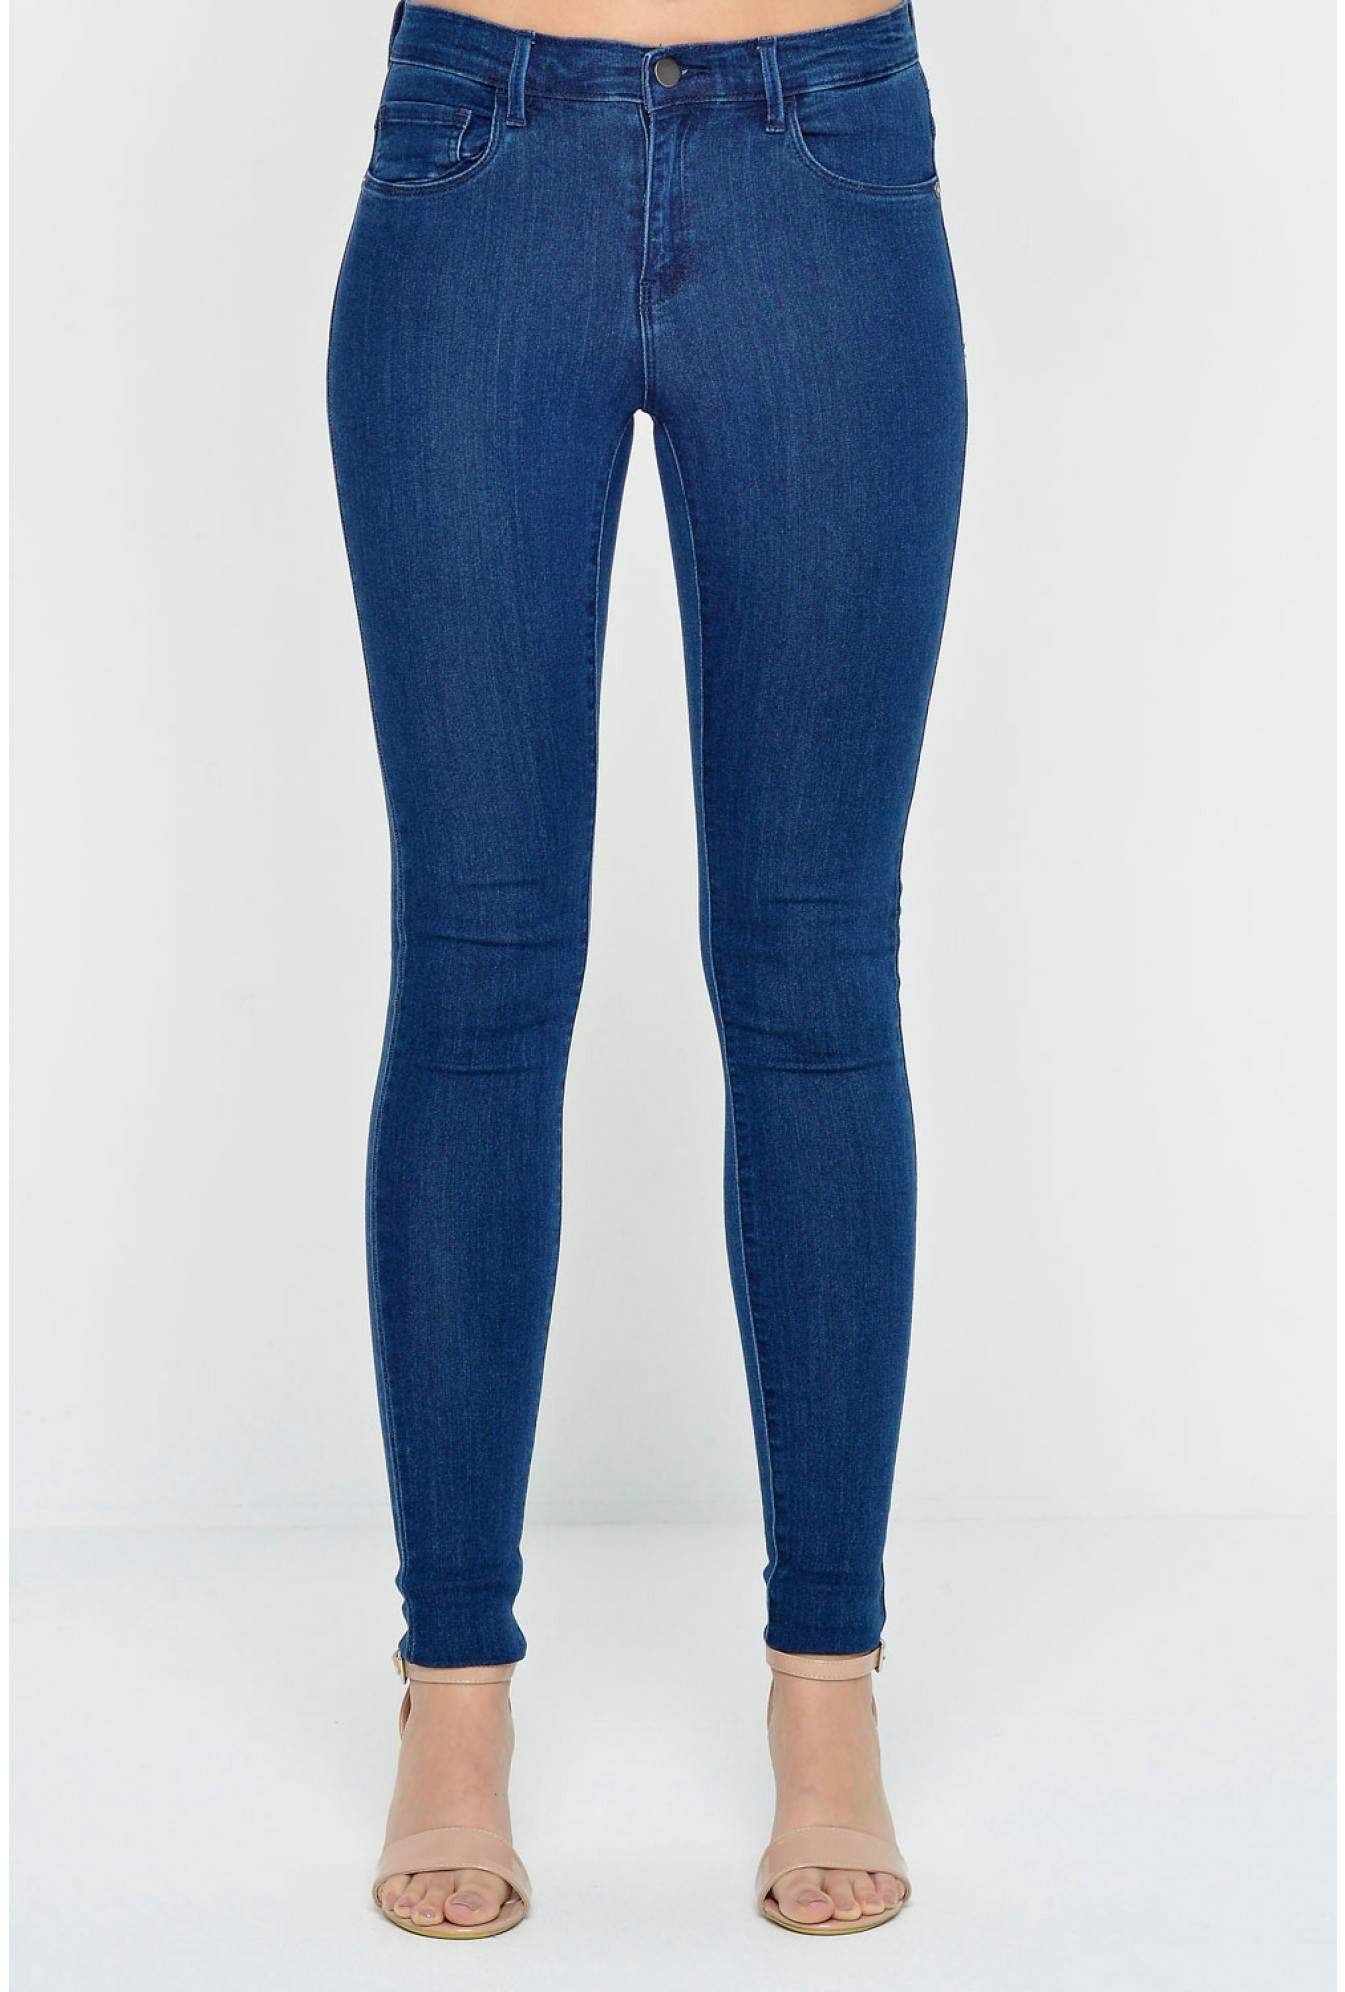 Only Rain Regular Skinny Jeans in Blue | iCLOTHING